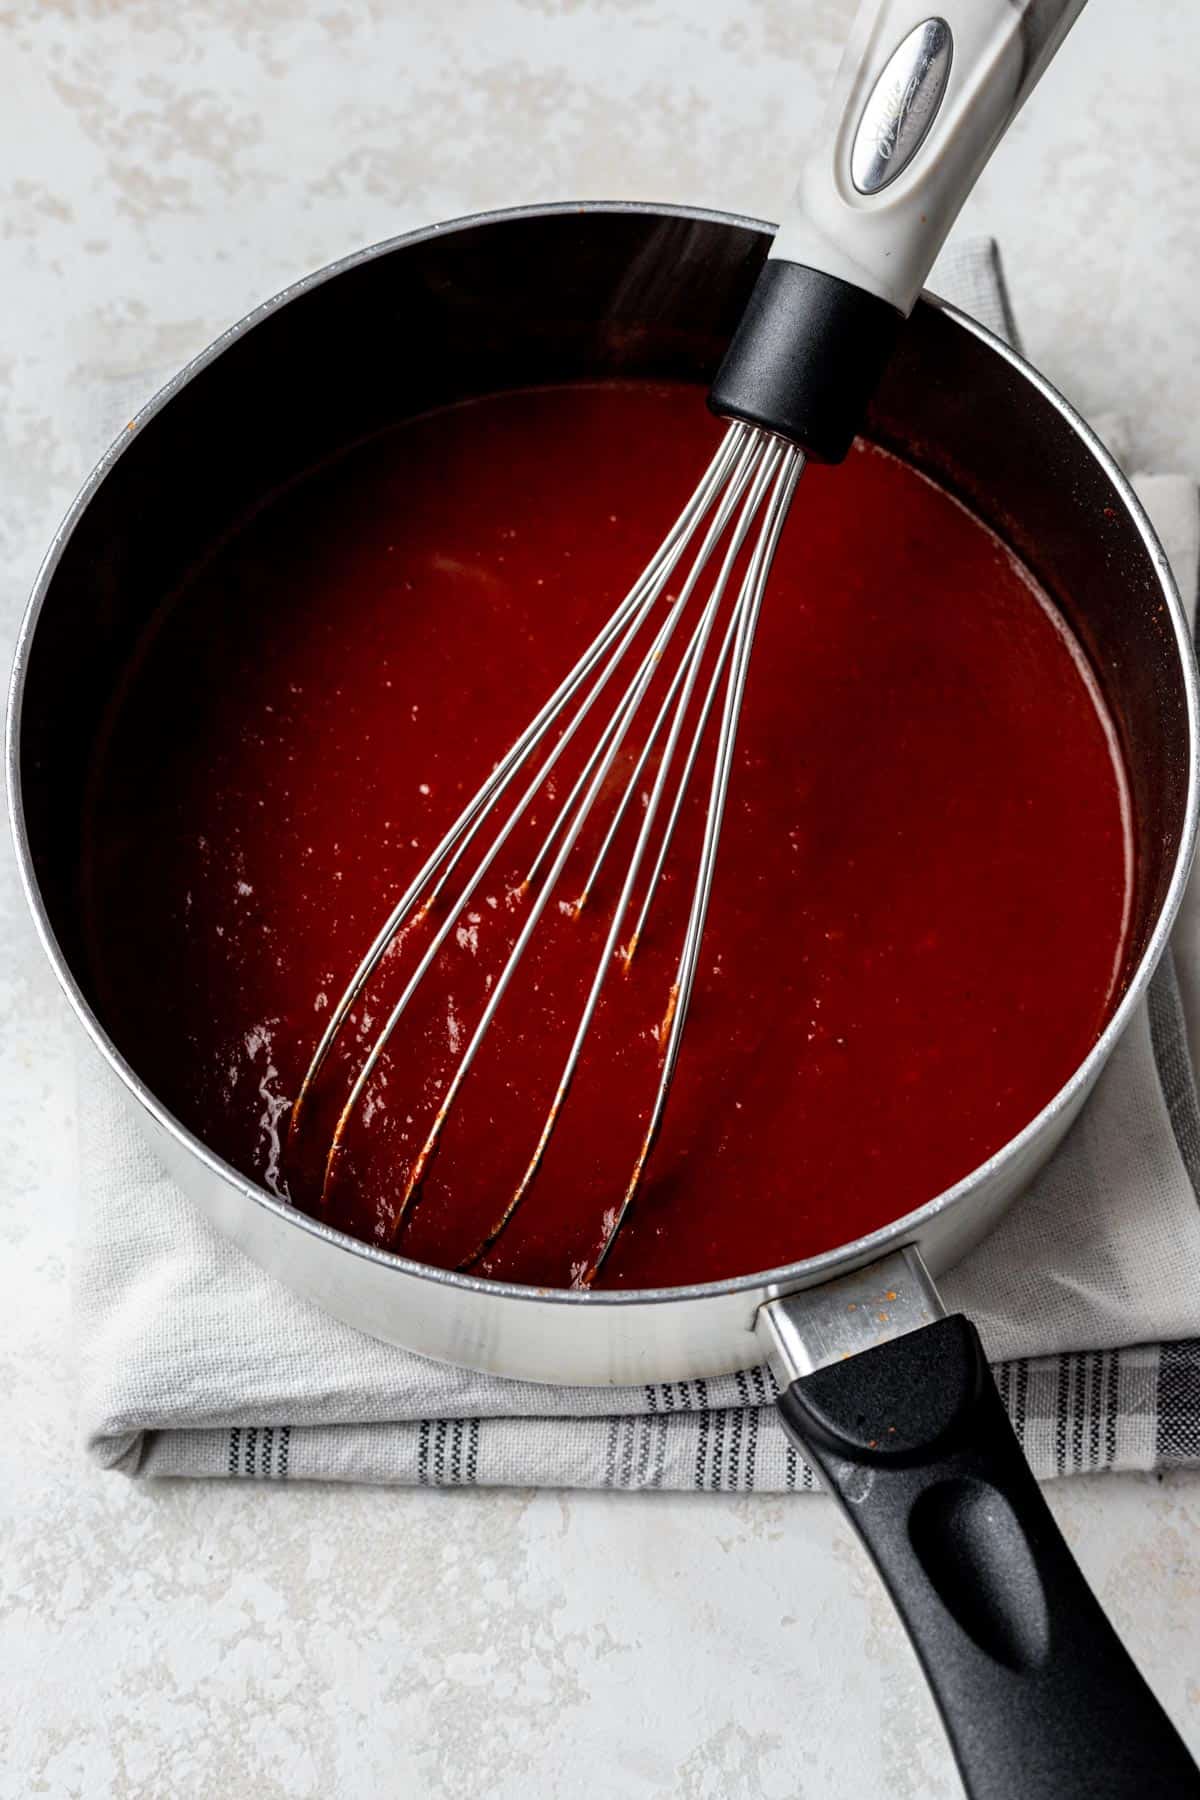 Enchilada sauce whisked in a saucepan.